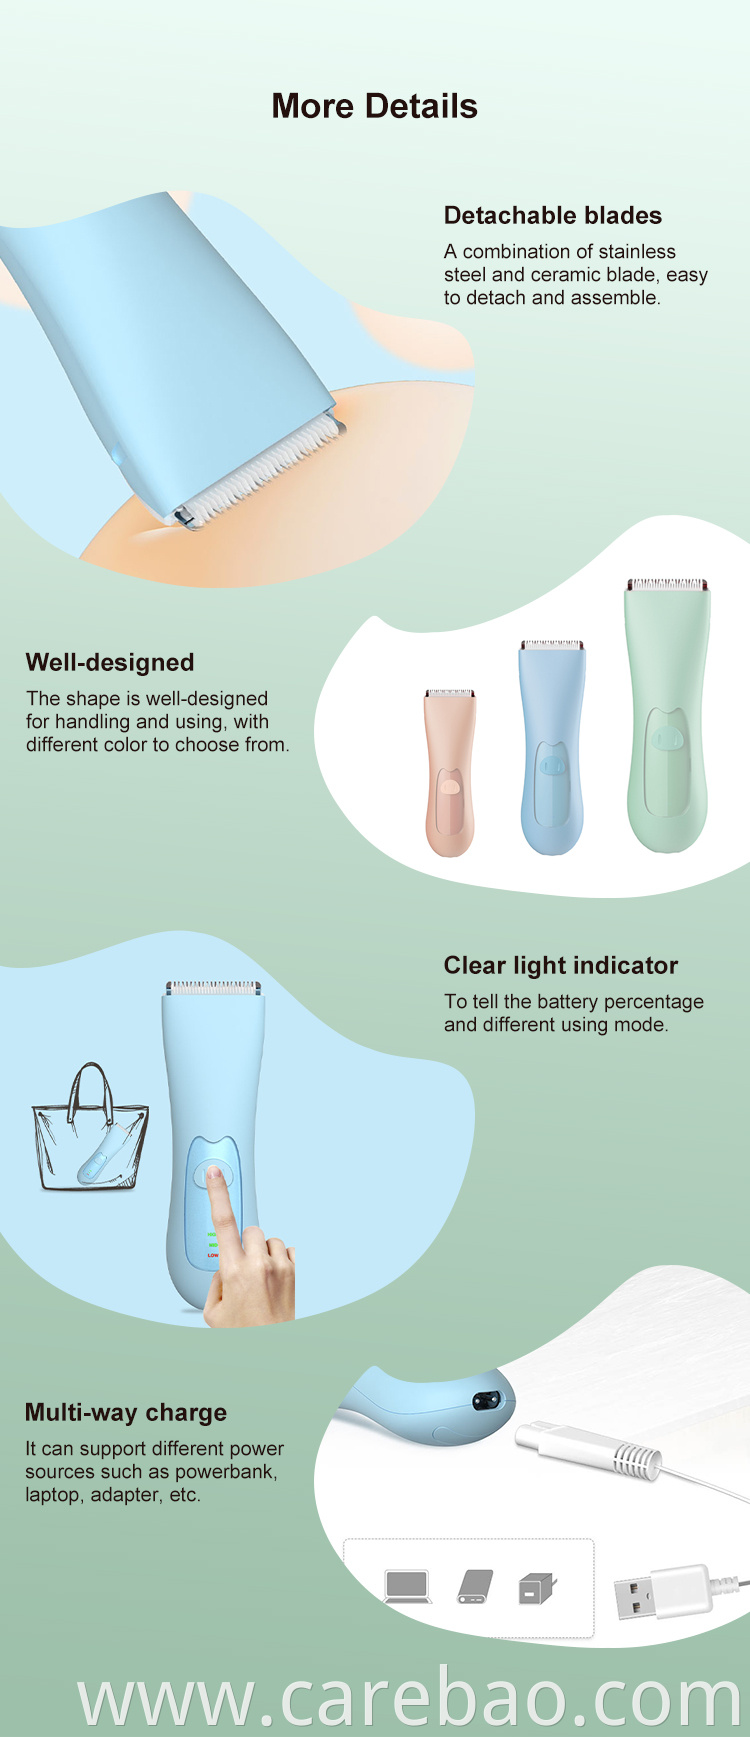 Carebao Best Selling Baby Product Waterproof Electric Baby Body Hair Clipper For Kids With Stainless Steel Ceramic Blade